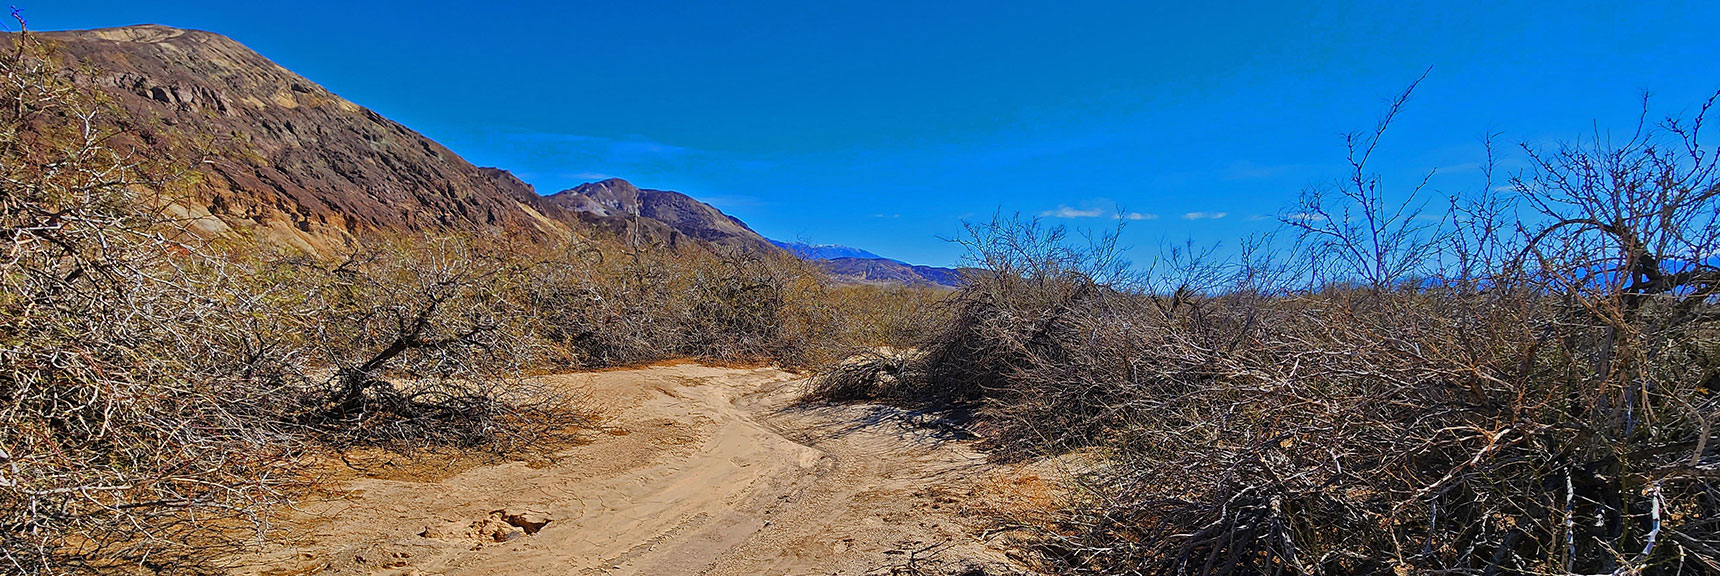 The Mesquite Grove Hides Supports a Valuable Ecosystem | Mesquite Grove | Death Valley, California | David Smith | Las Vegas Area Trails